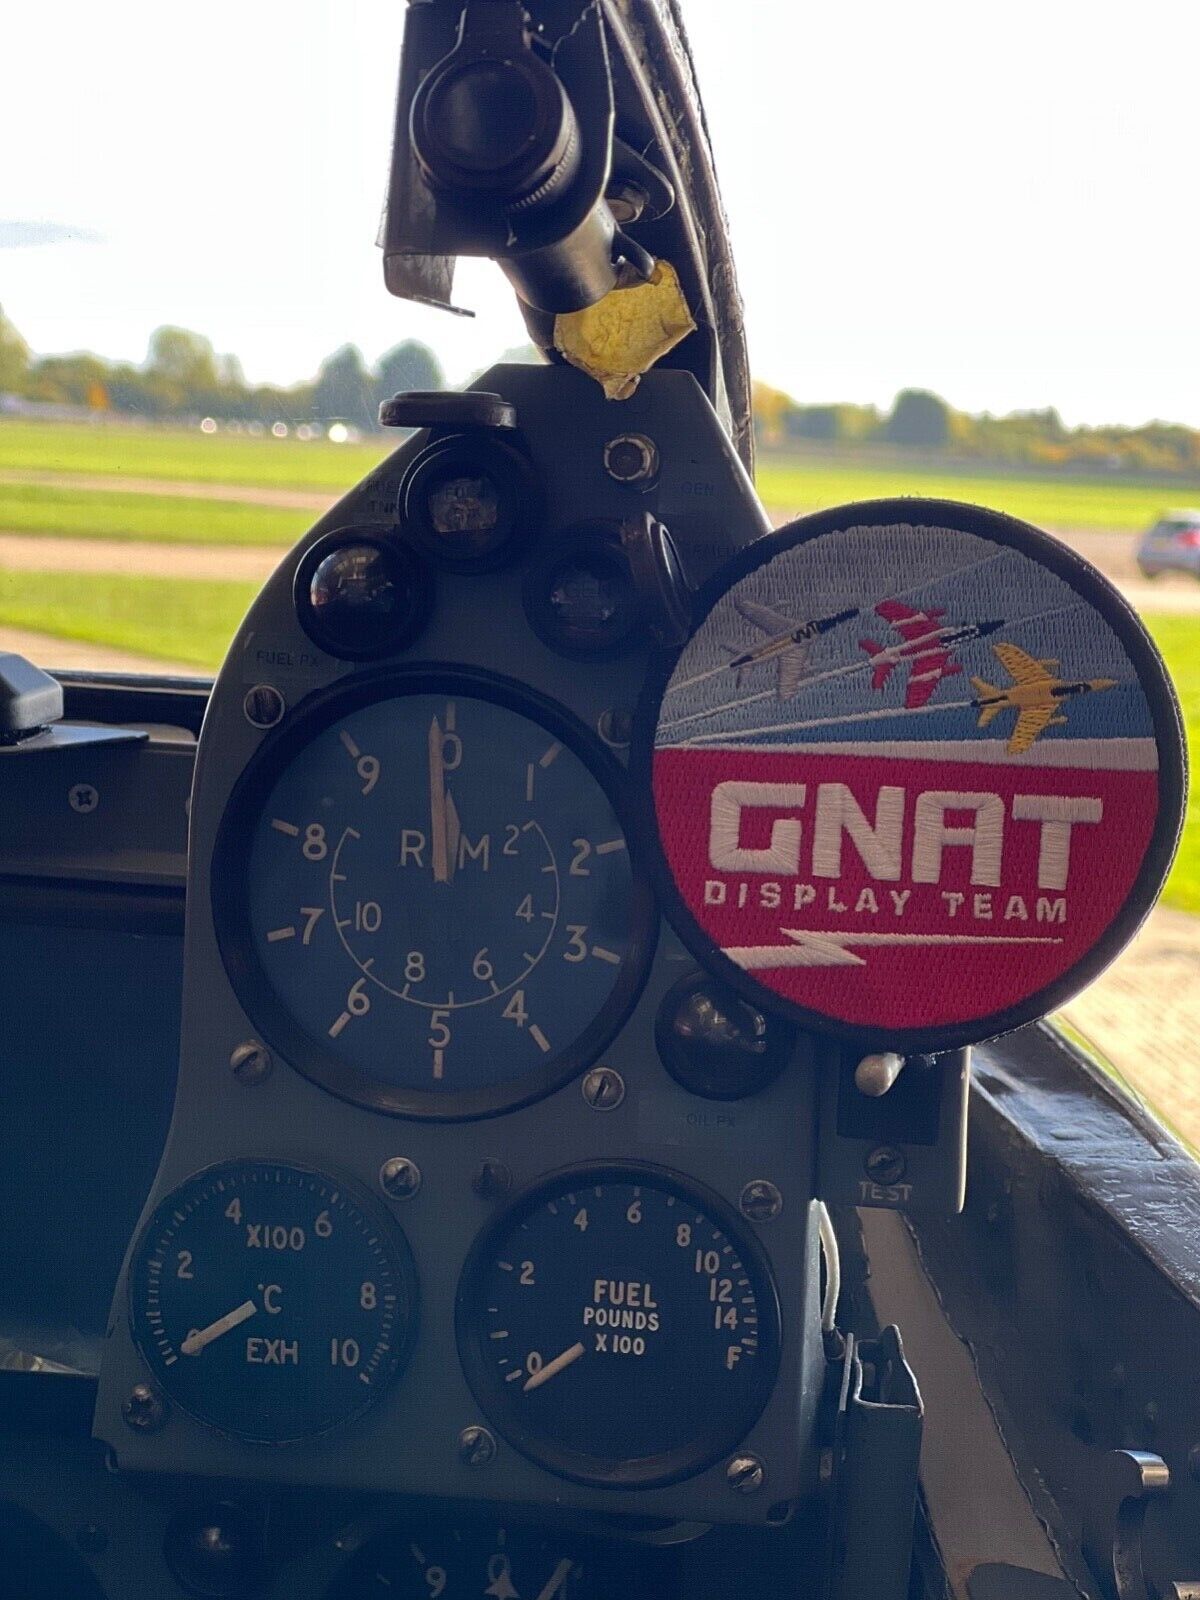 Gnat Display Team ltd edition military patch Hook And Loop Flown In Folland Gnat